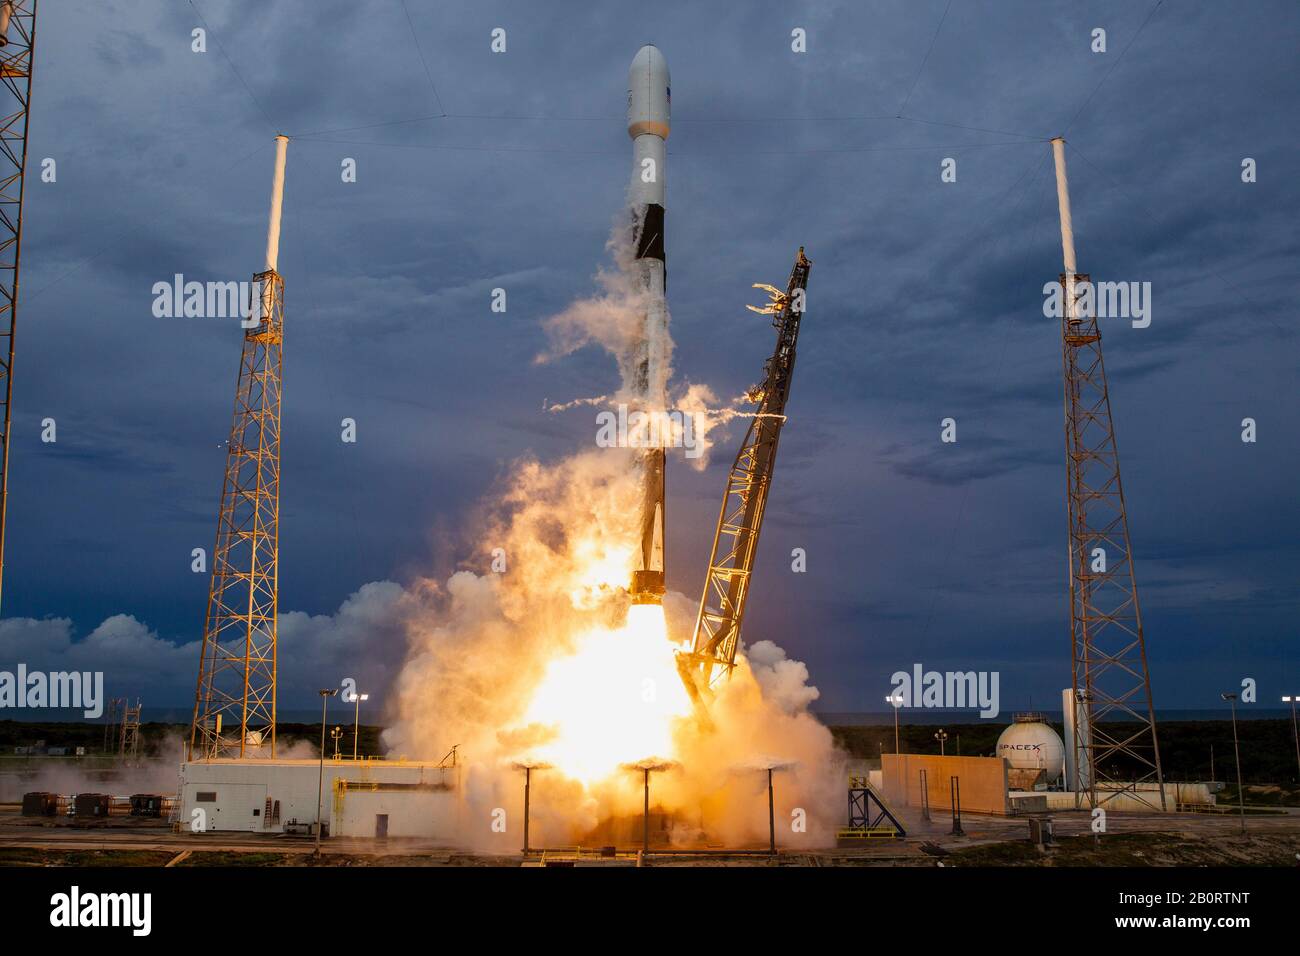 CAPE CANAVERAL, USA - 06 Aug 2019 - A SpaceX Falcon 9 rocket launches off into space with the AMOS-17 satellite from Cape Canaveral, Florida, USA. The Stock Photo